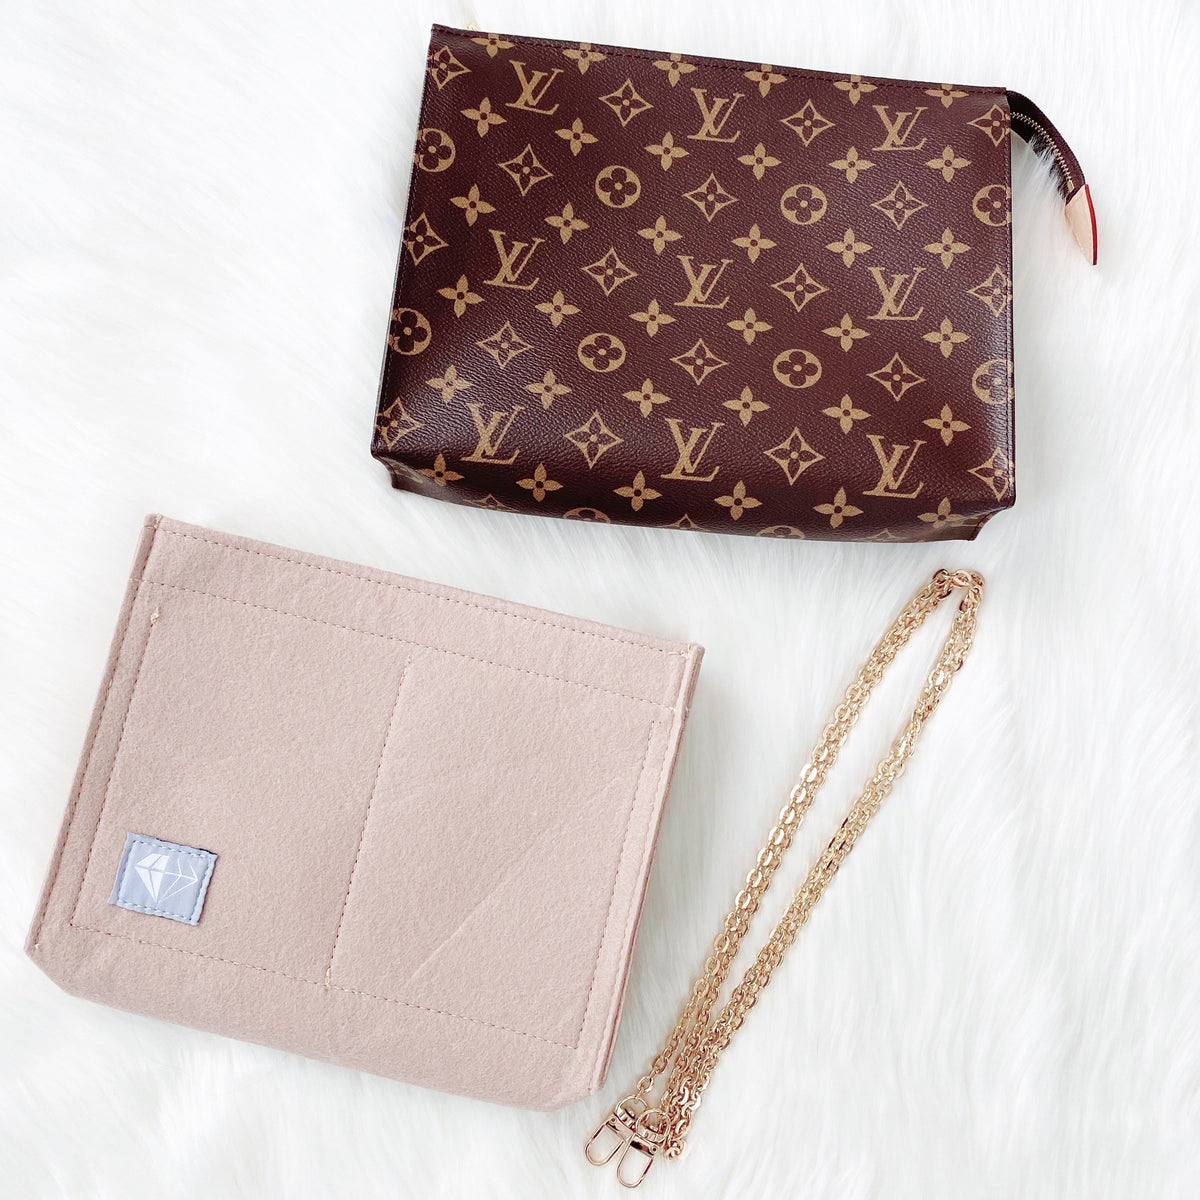 Louis Vuitton Toiletry 26 Zip Pouch in Monogram with Conversion Kit - SOLD